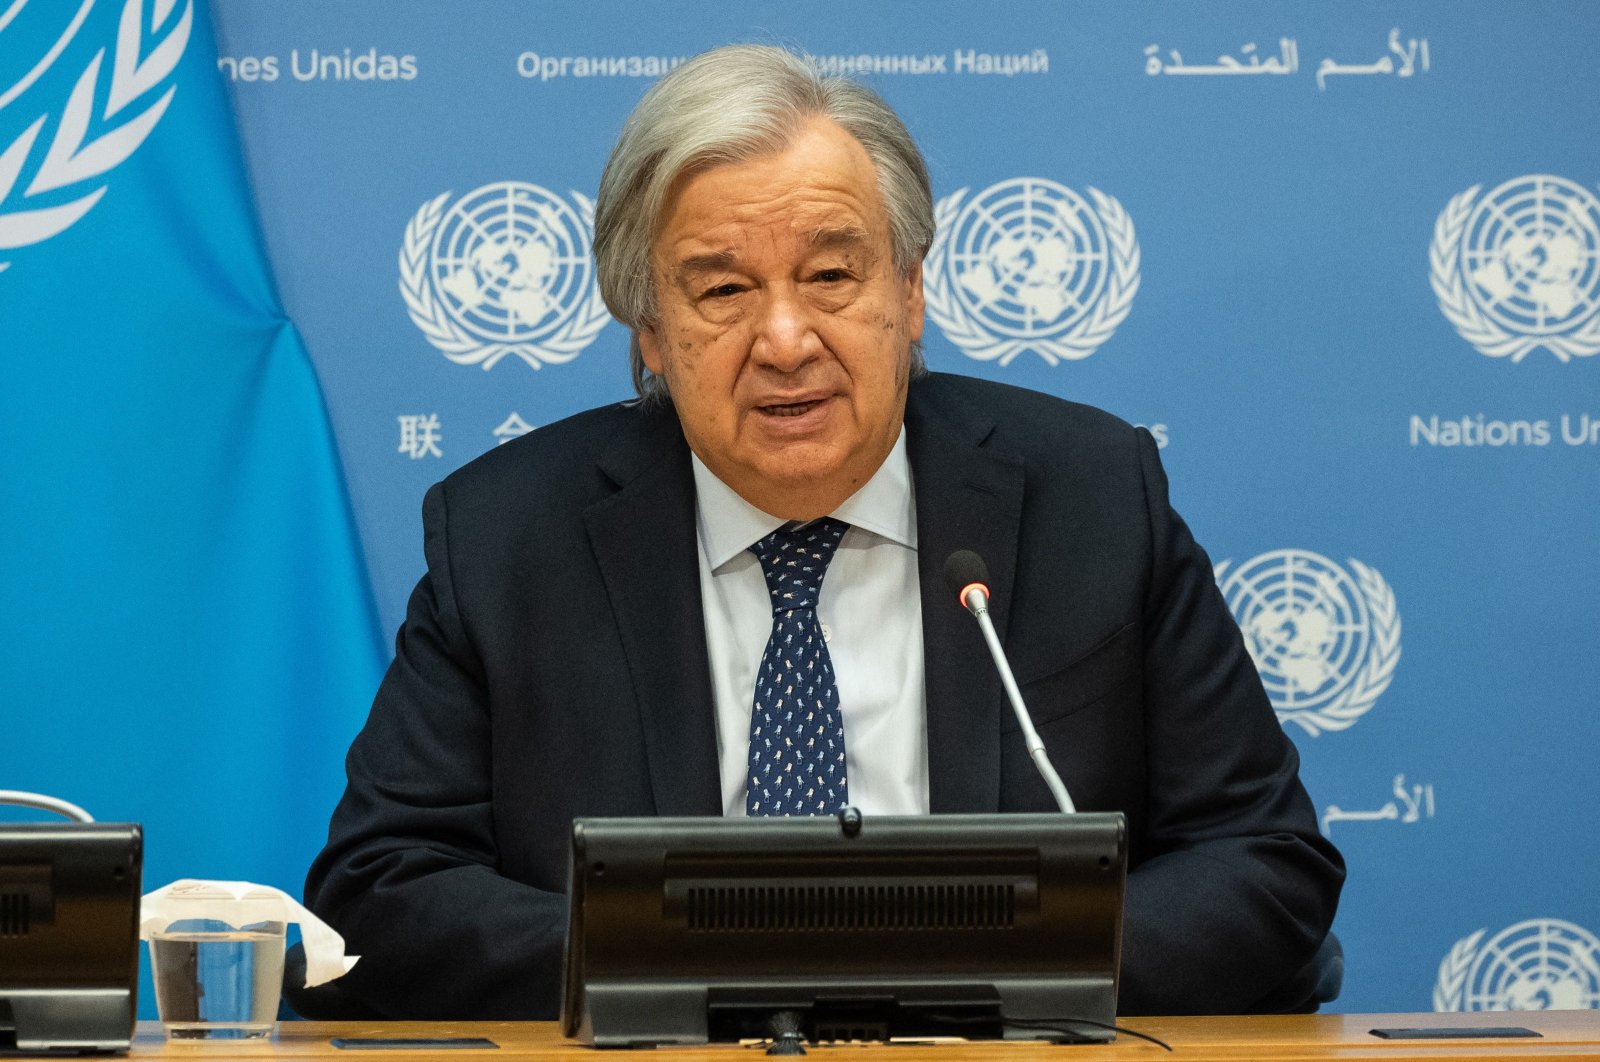 UN Secretary-General Antonio Guterres delivers remarks during a security council open debate on the maintenance of international peace and security at UN headquarters in New York on Nov. 20, 2023. (AFP Photo)